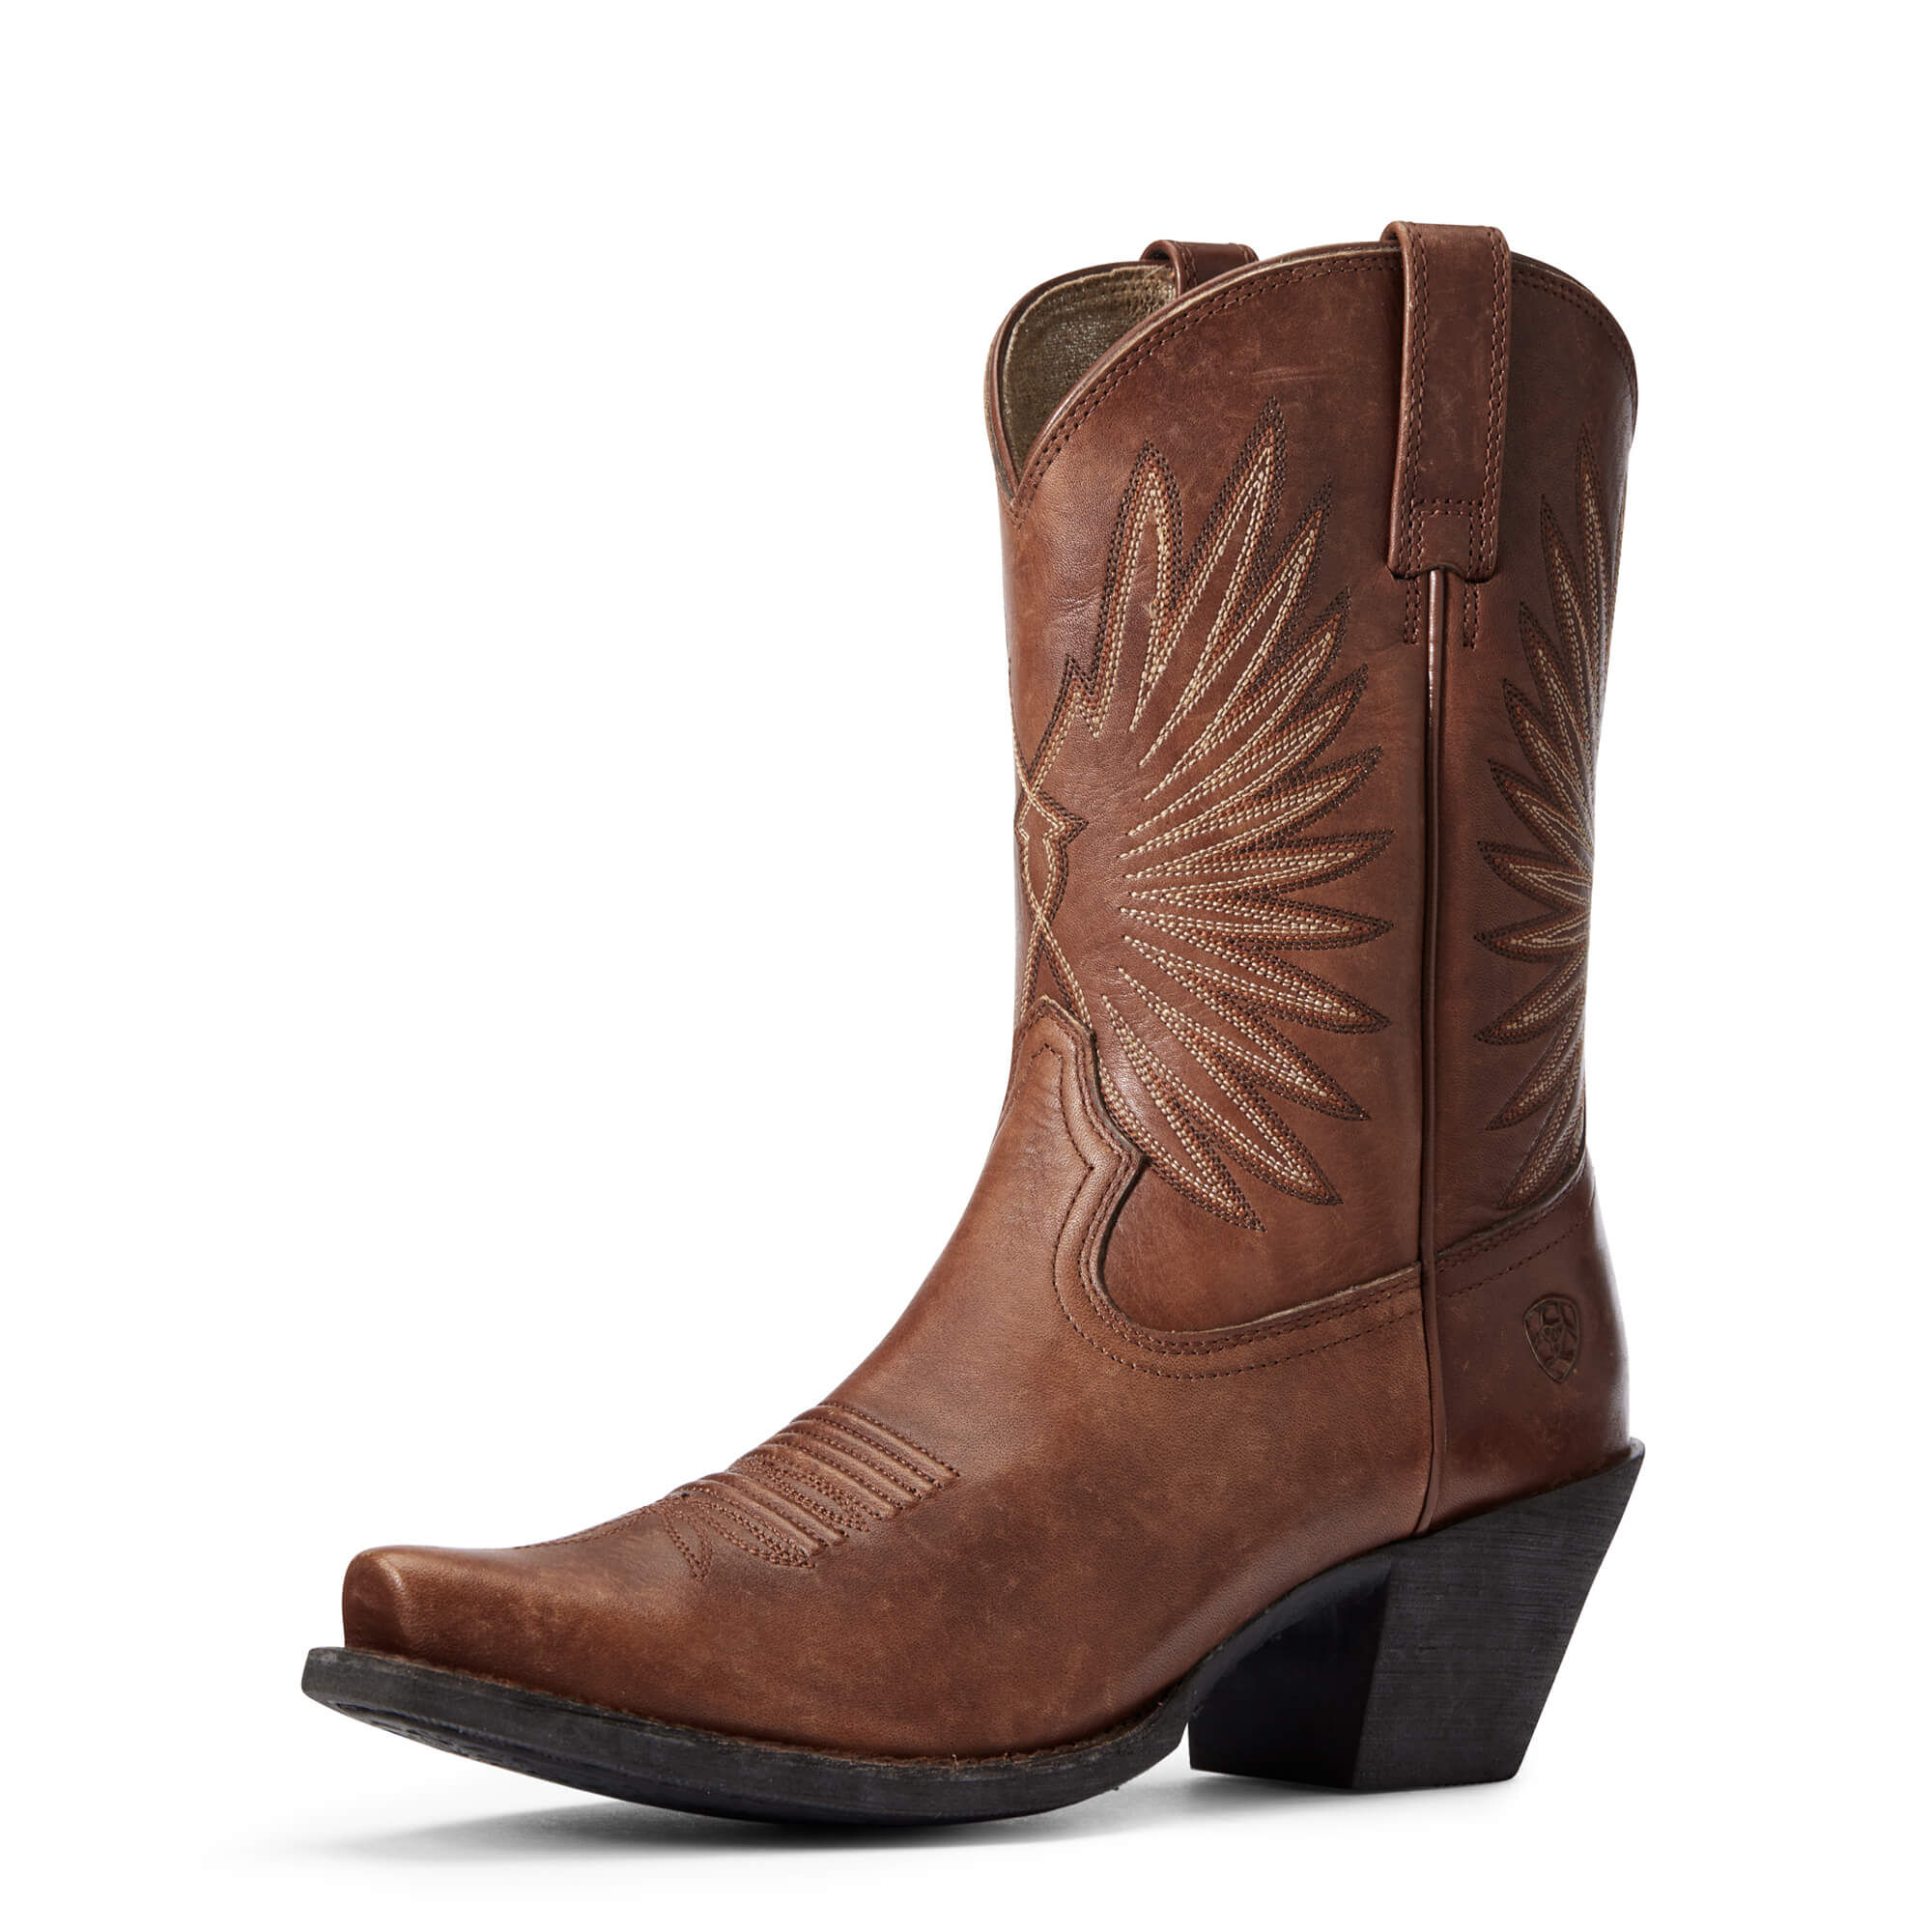 Women's Goldie Western Boots in Naturally Distressed Cognac Leather  by Ariat